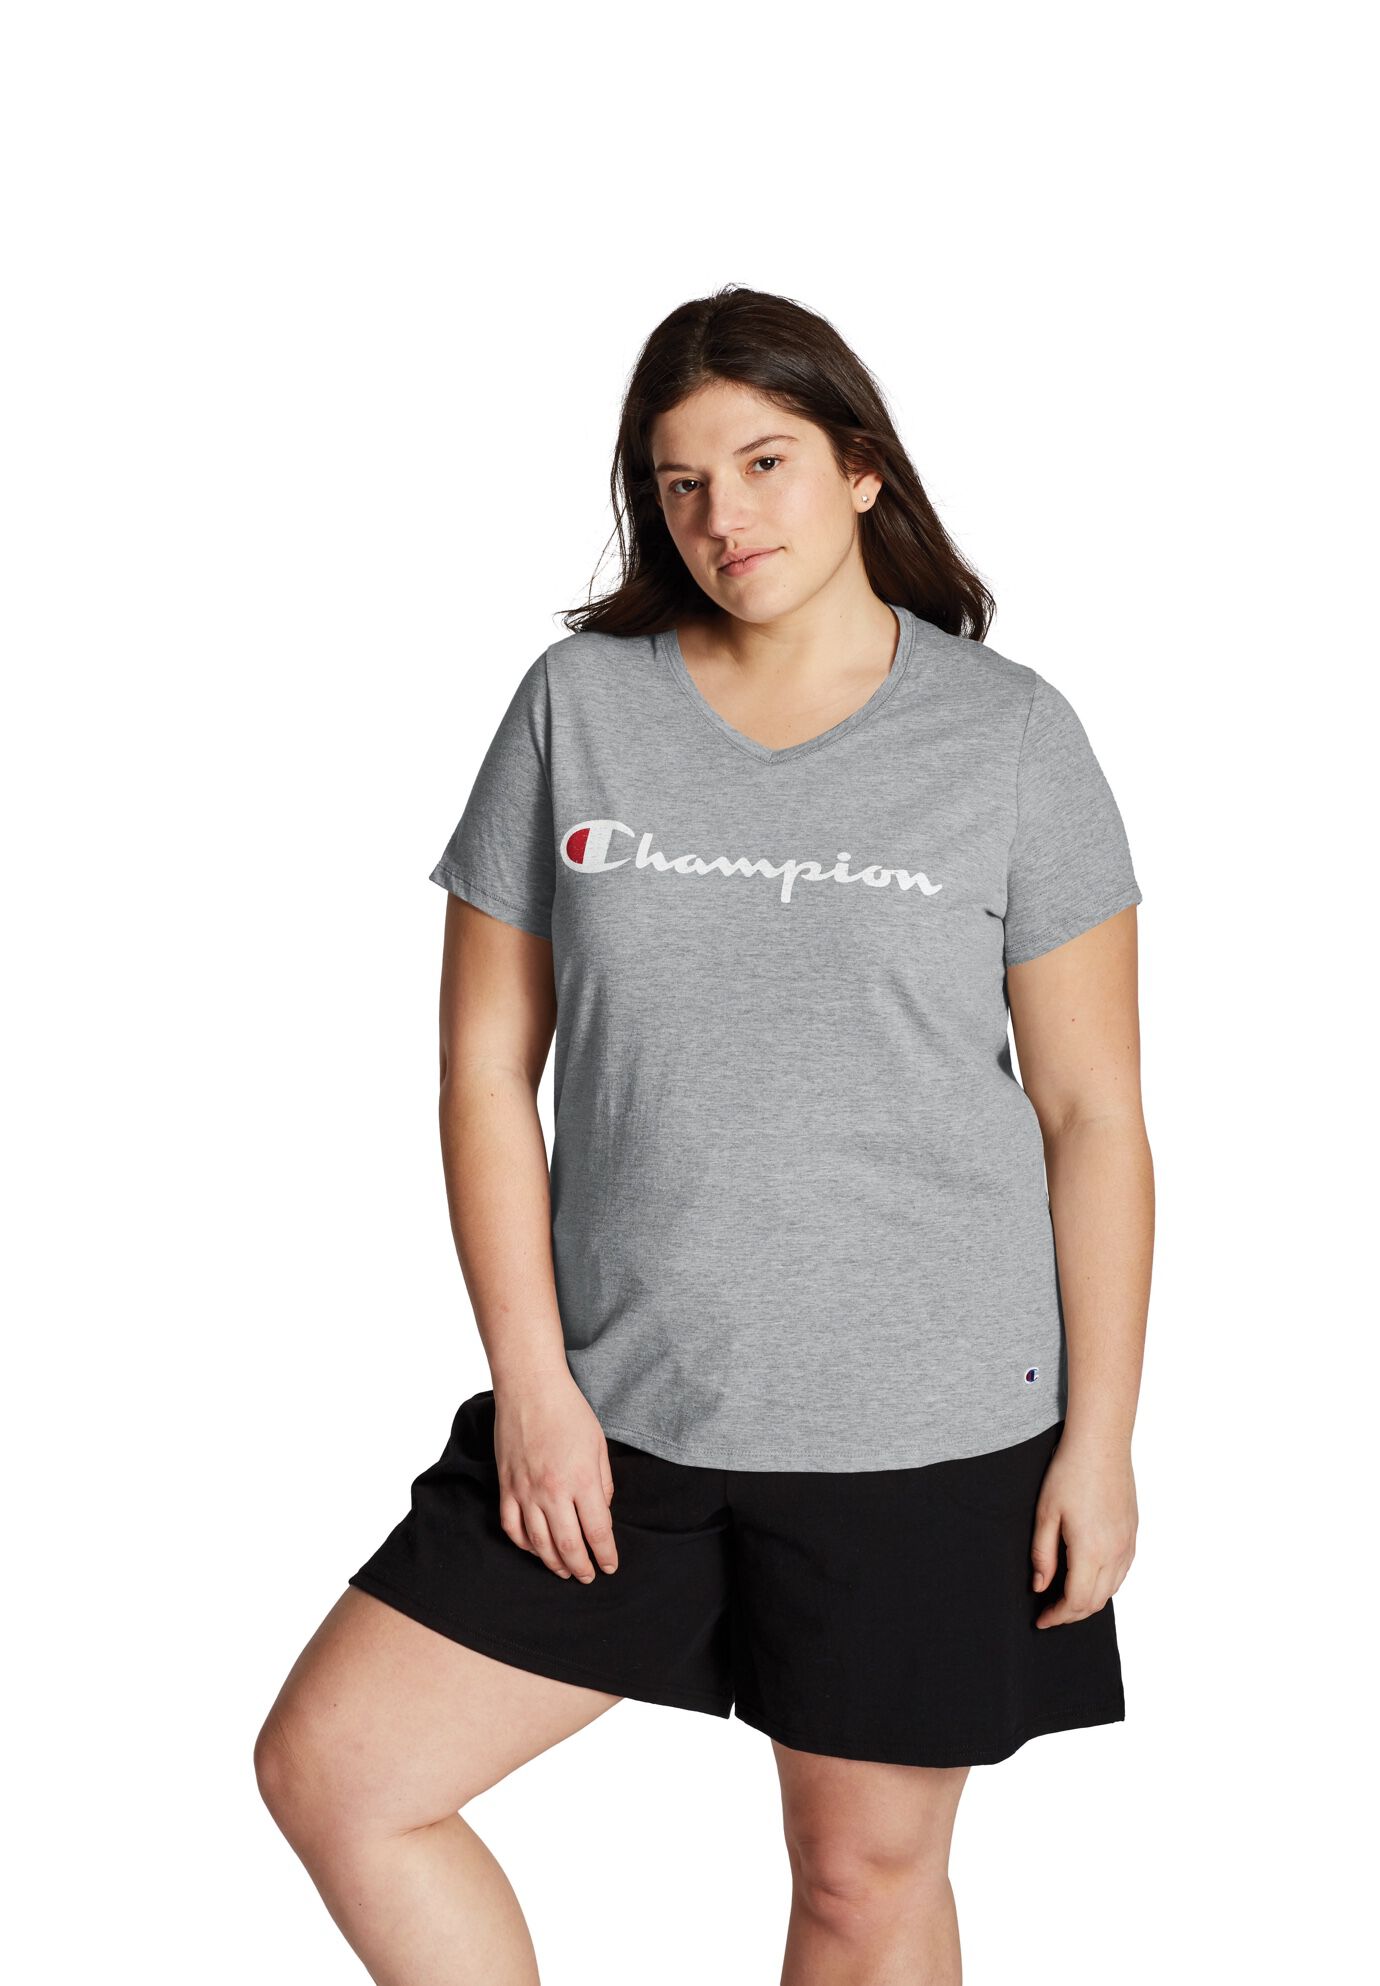 Plus Size Women's Jersey V-Neck Tee Graphic-Classic Script by Champion in Oxford Gray (Size 1X)